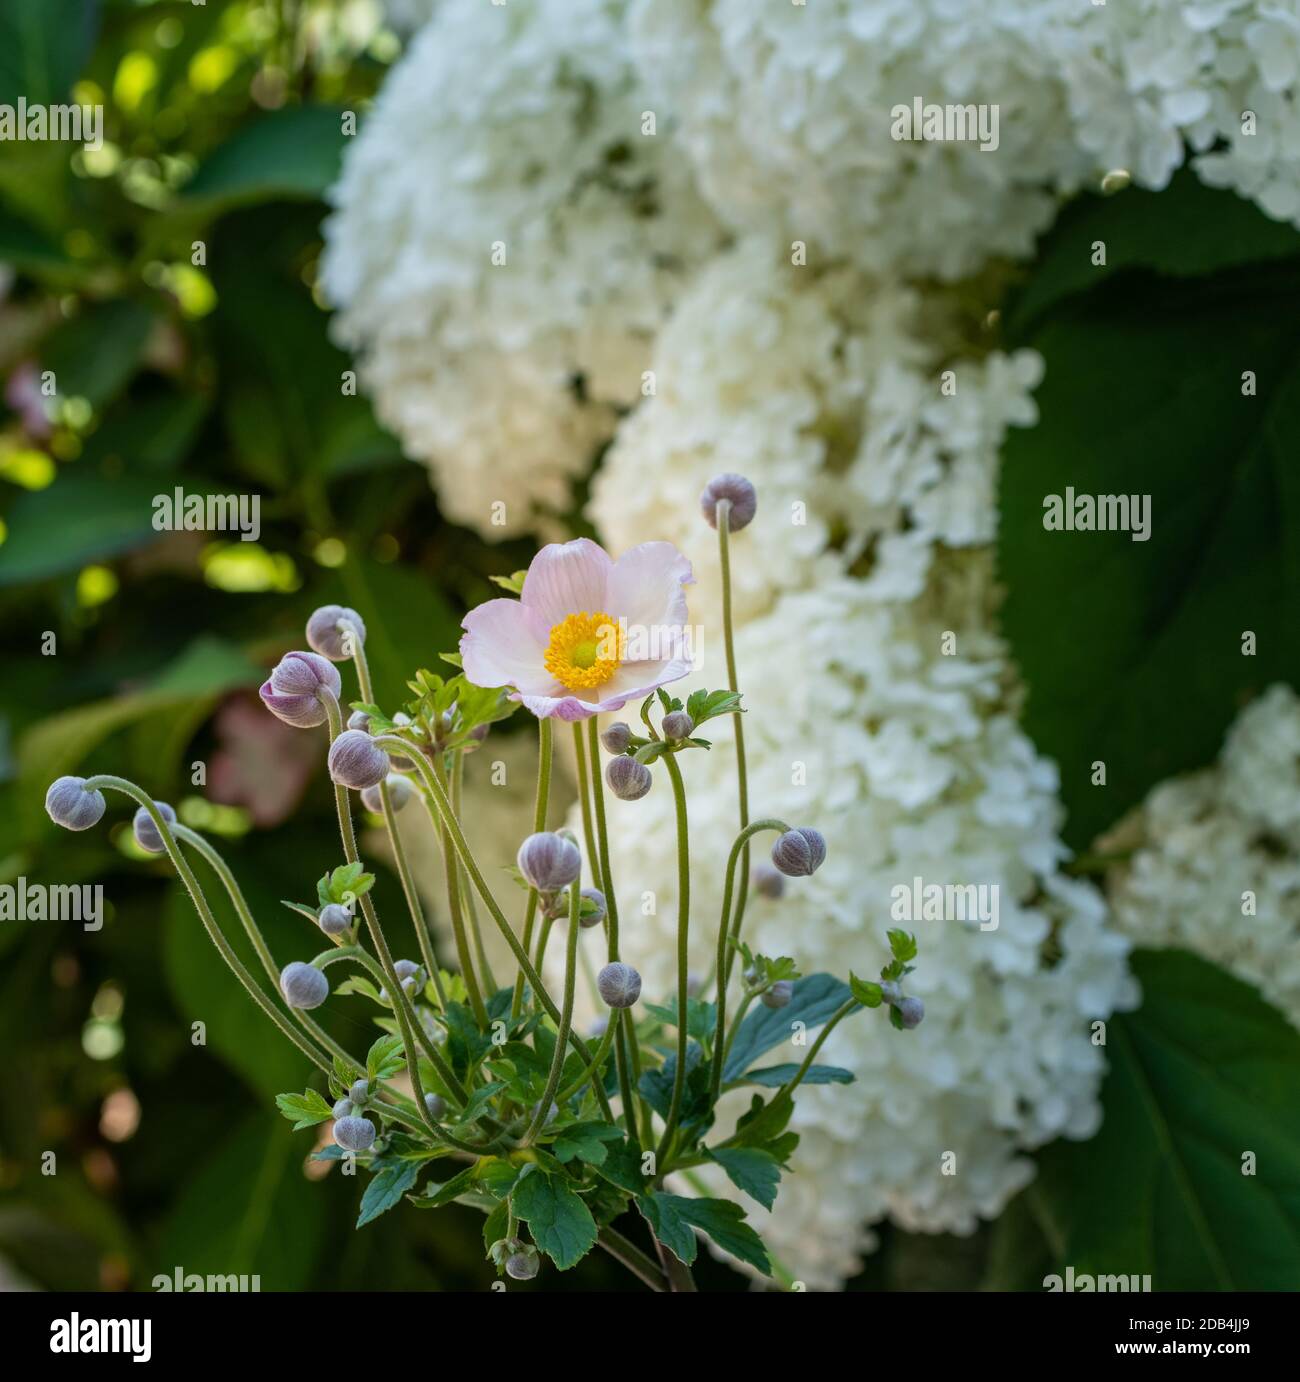 pink autumn anemone with buds in front of a white lush round hortensia on a natural blurred background Stock Photo